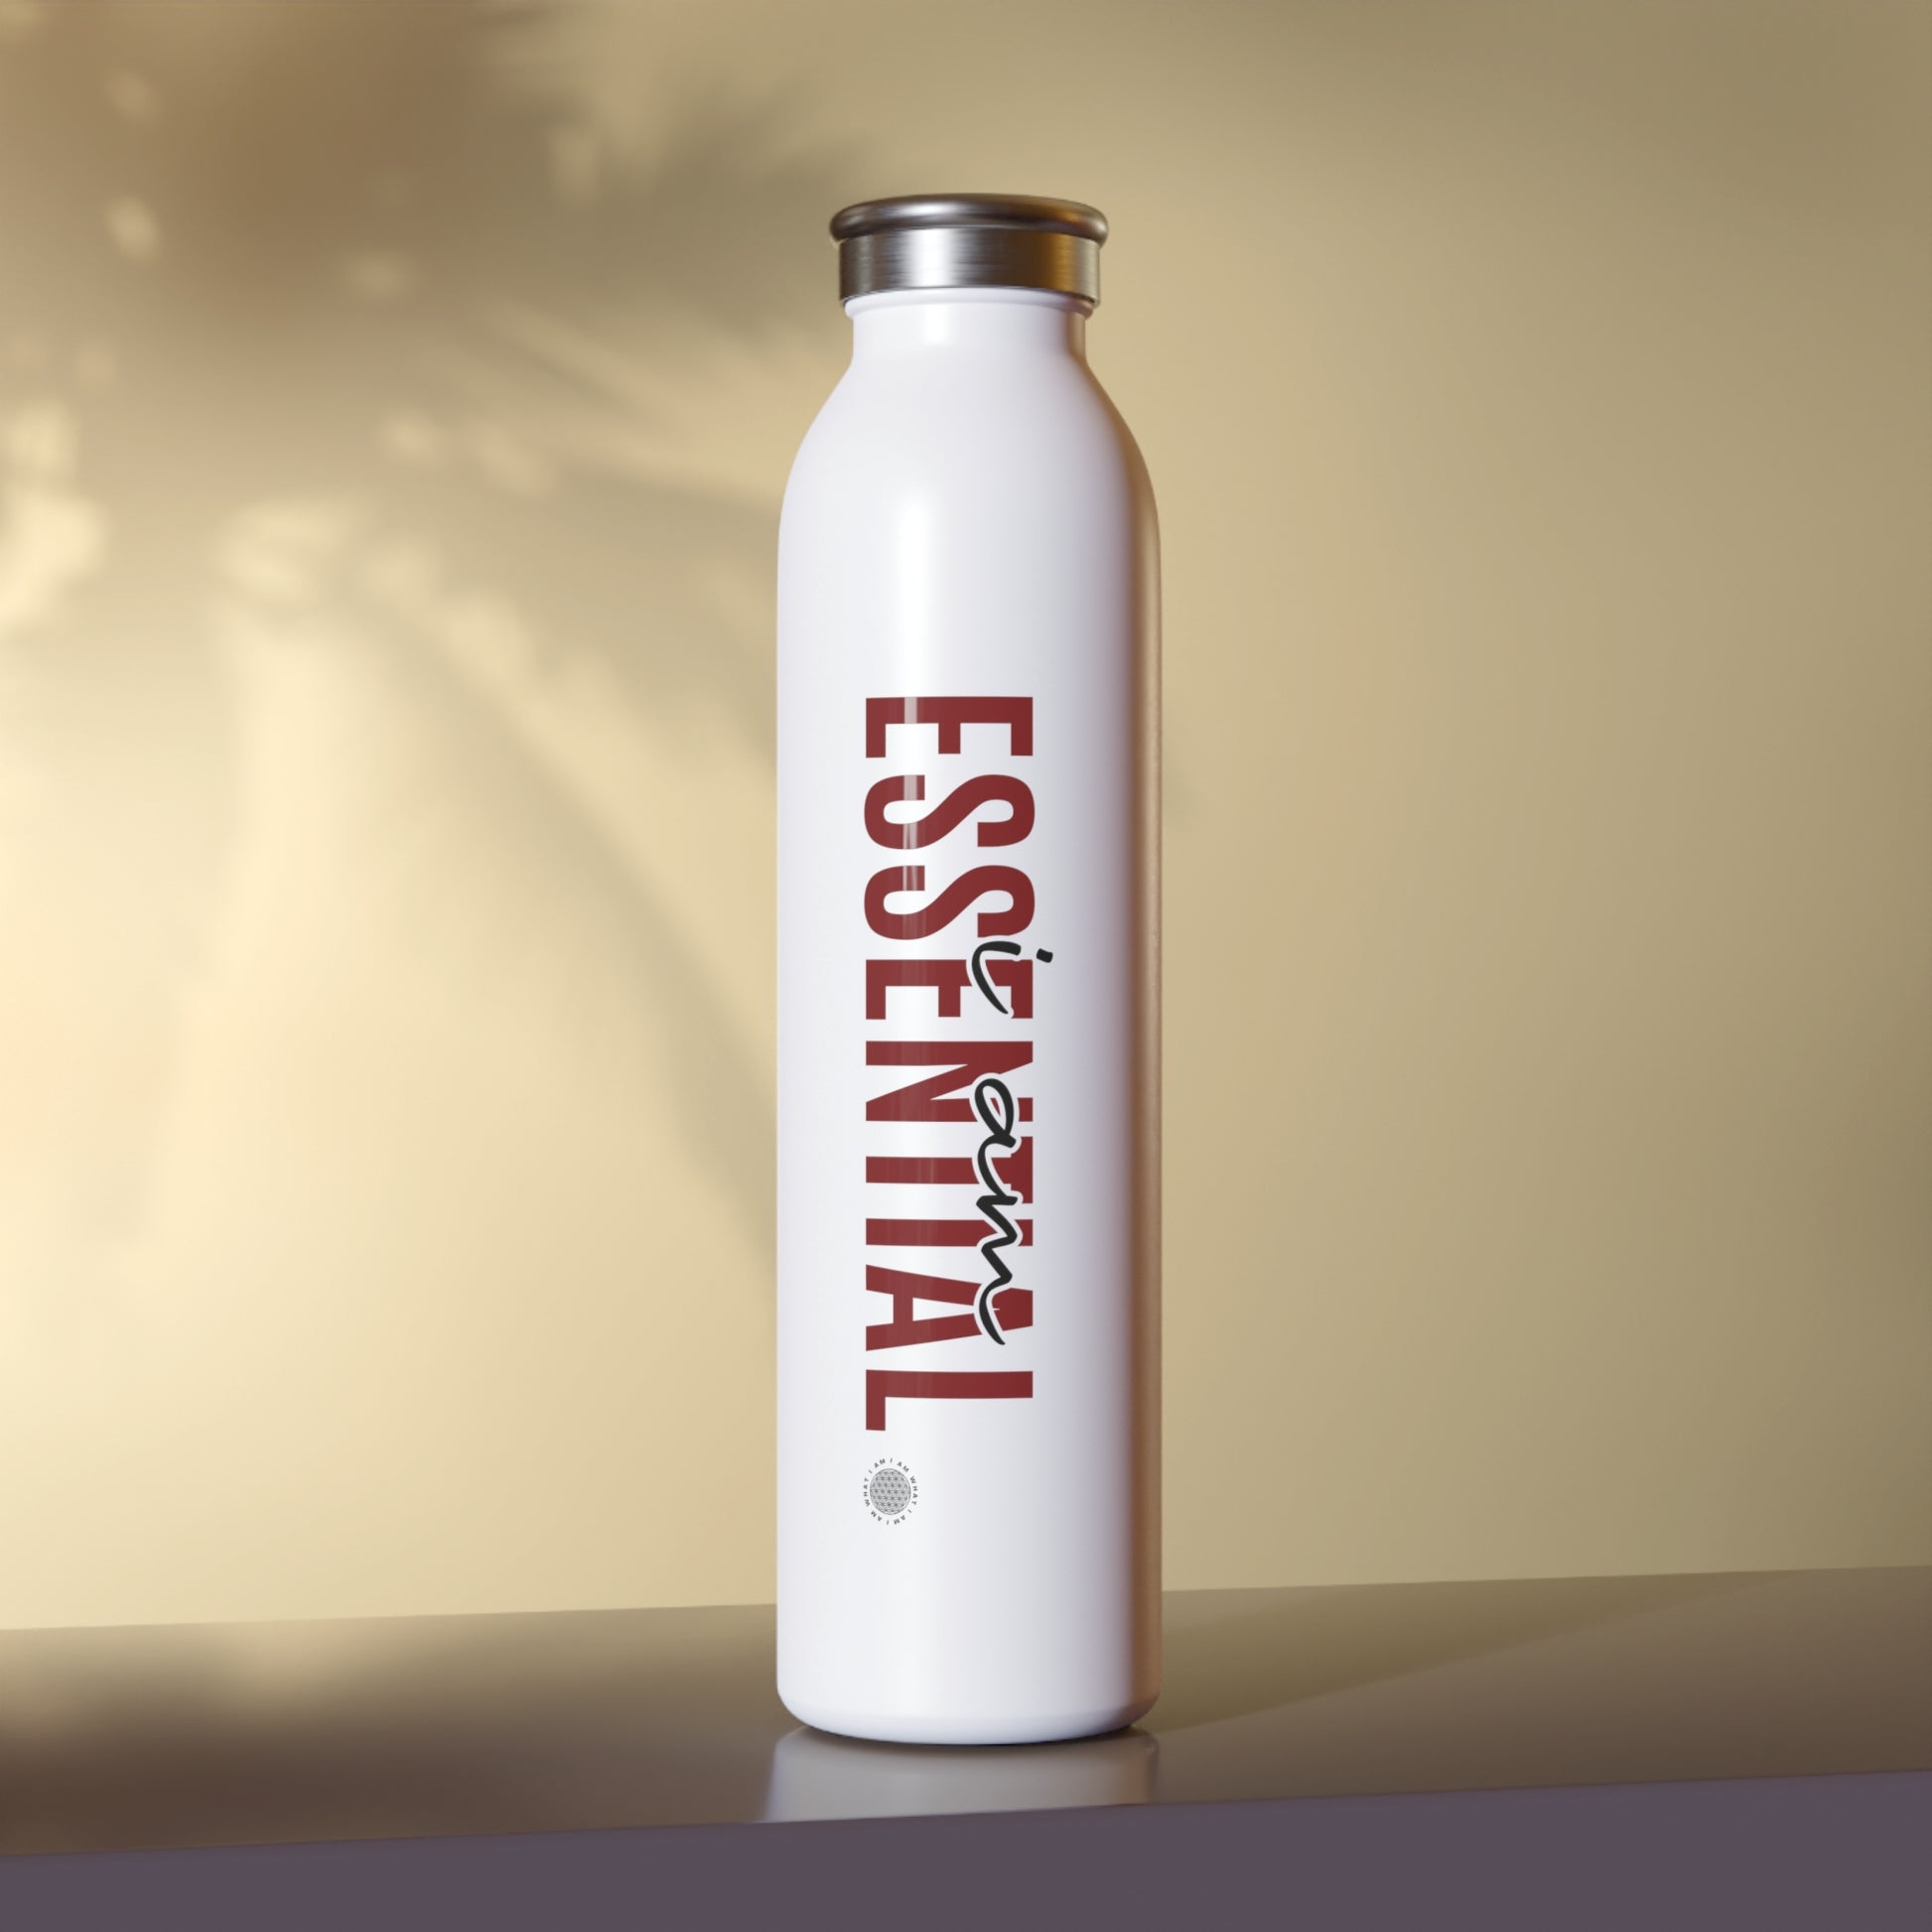 Our I Am Essential affirmation water bottle is one of our positive affirmations for mental health. Positive thinking keeps our mindset happy and healthy. This personalized water bottle was designed to become a creator’s favorite canvas of expression.